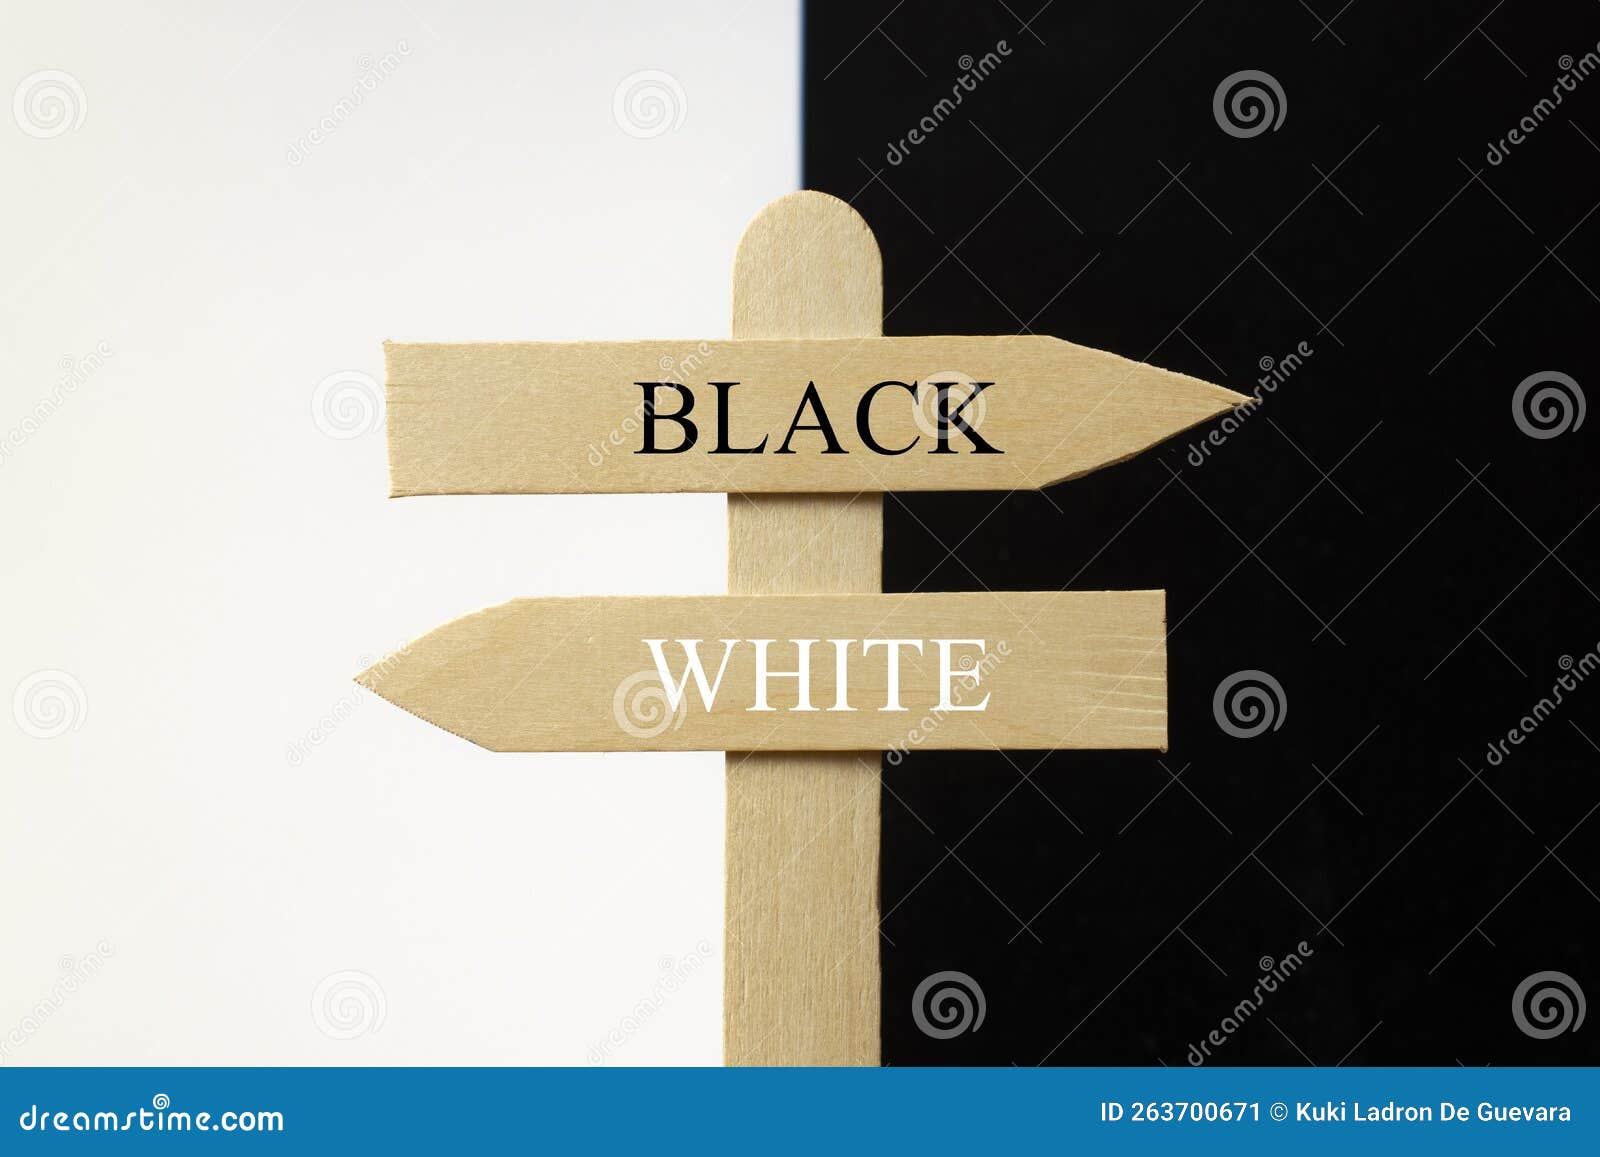 wooden sign with the words black and white